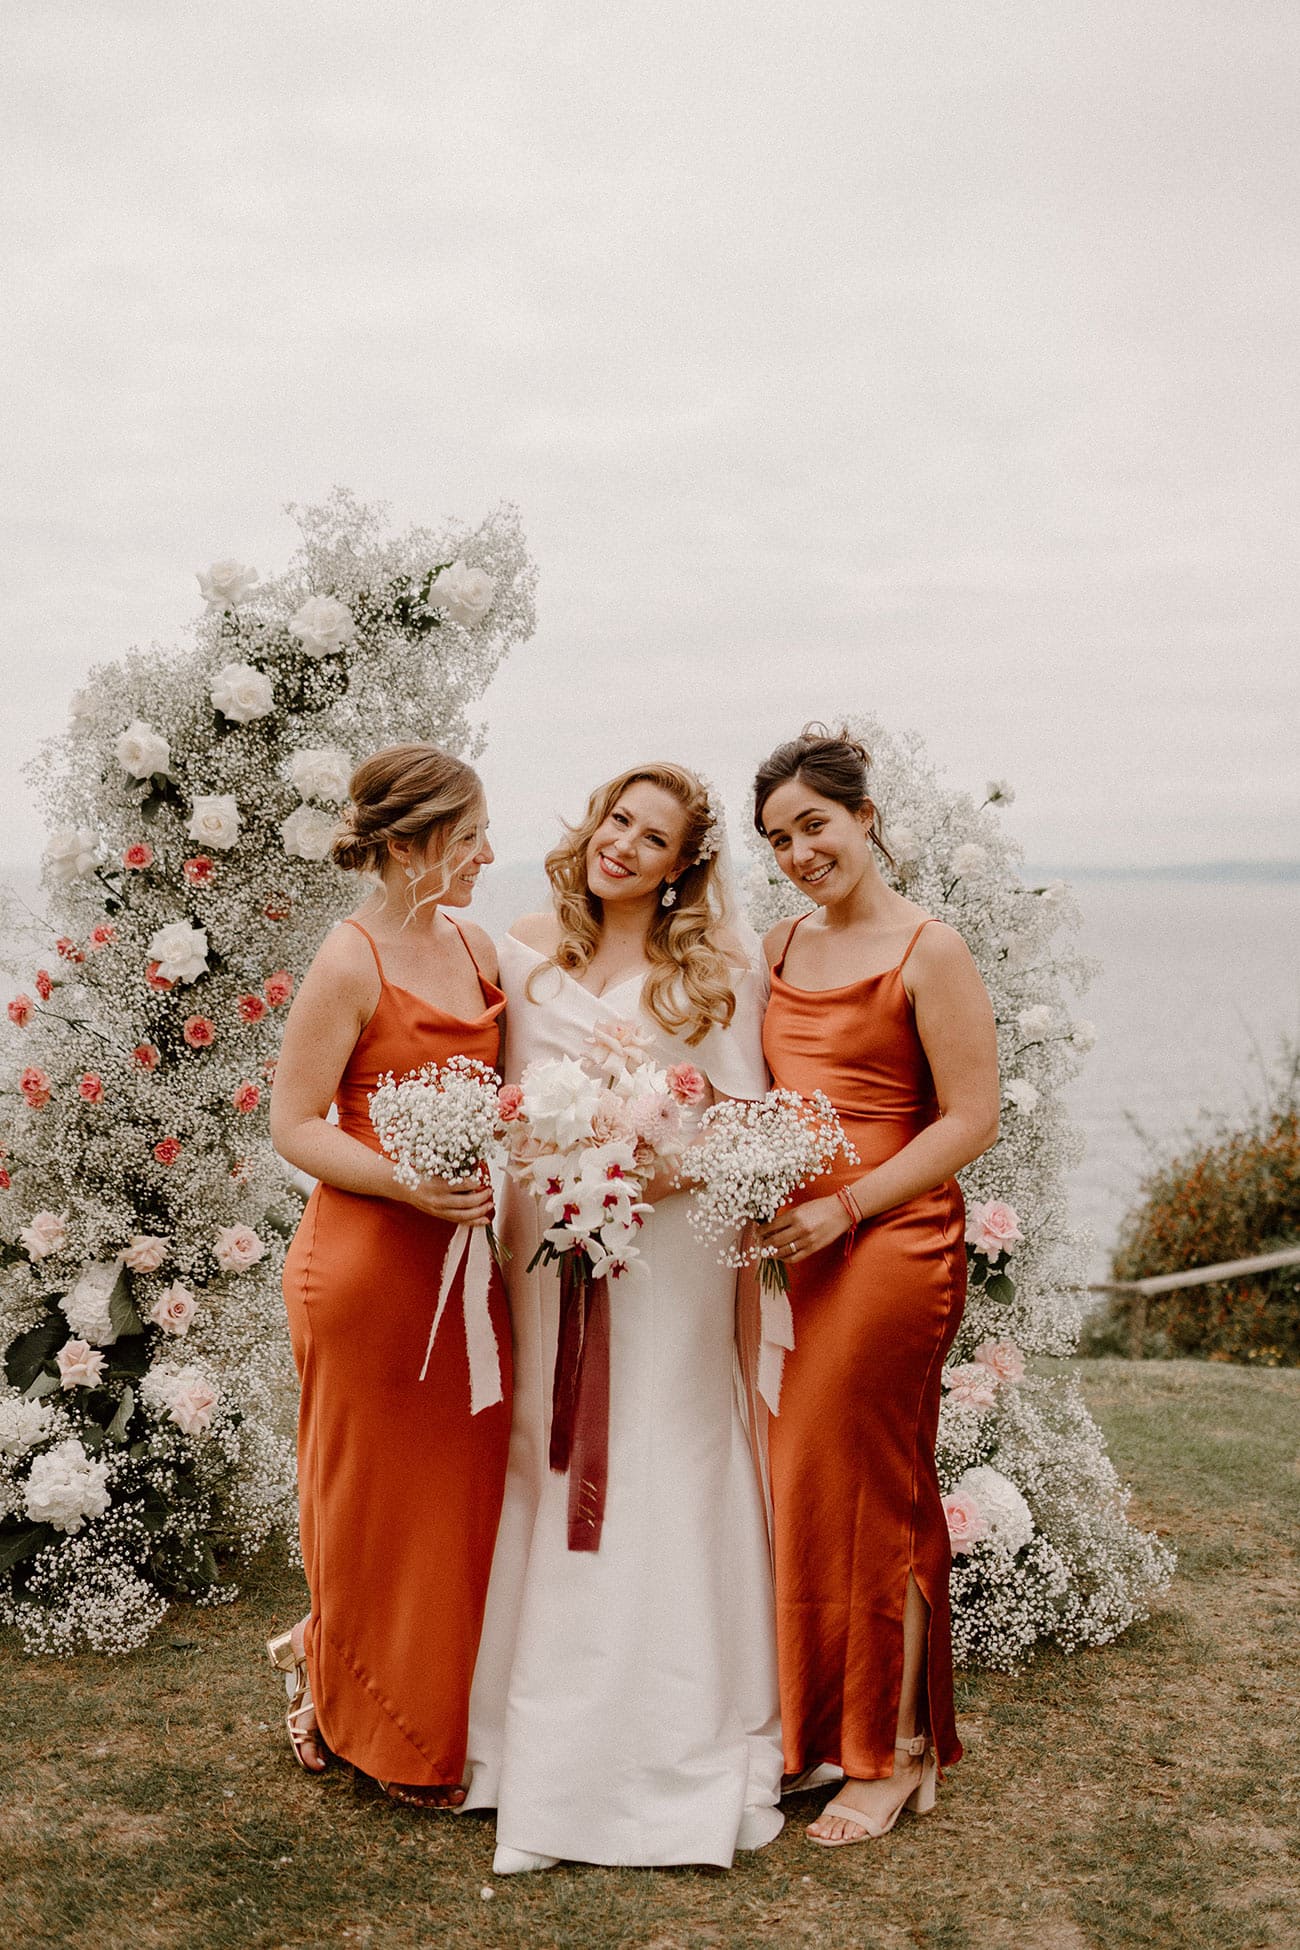 The bride posing with her two bridesmaids who are in copper dresses